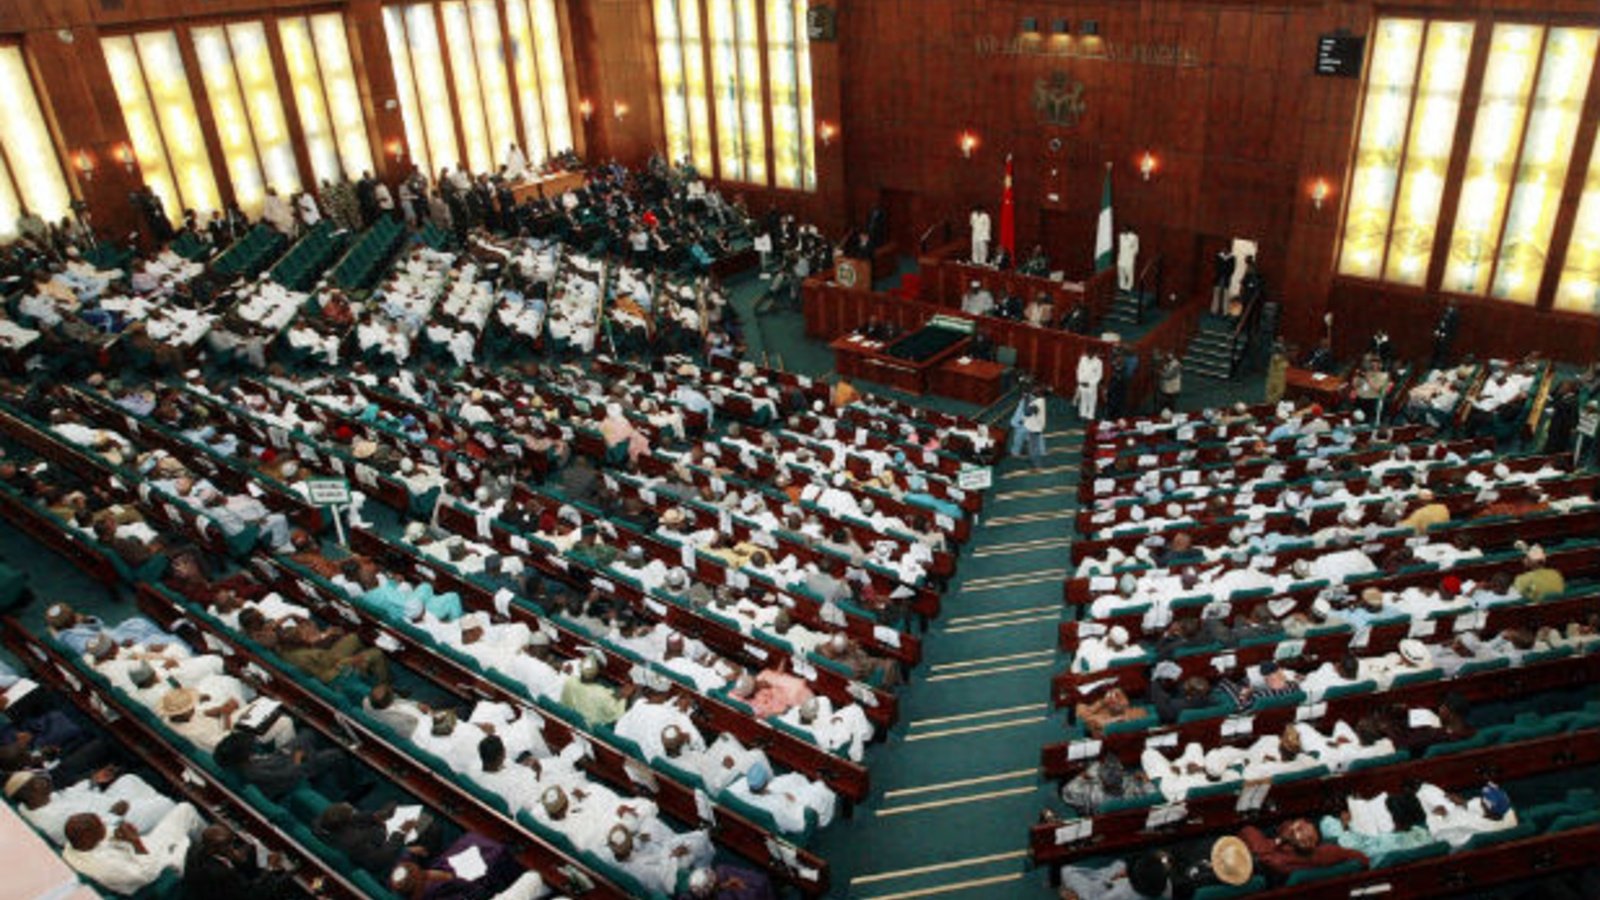 NASS proposes three-year post-office political party ban on CBN top executives